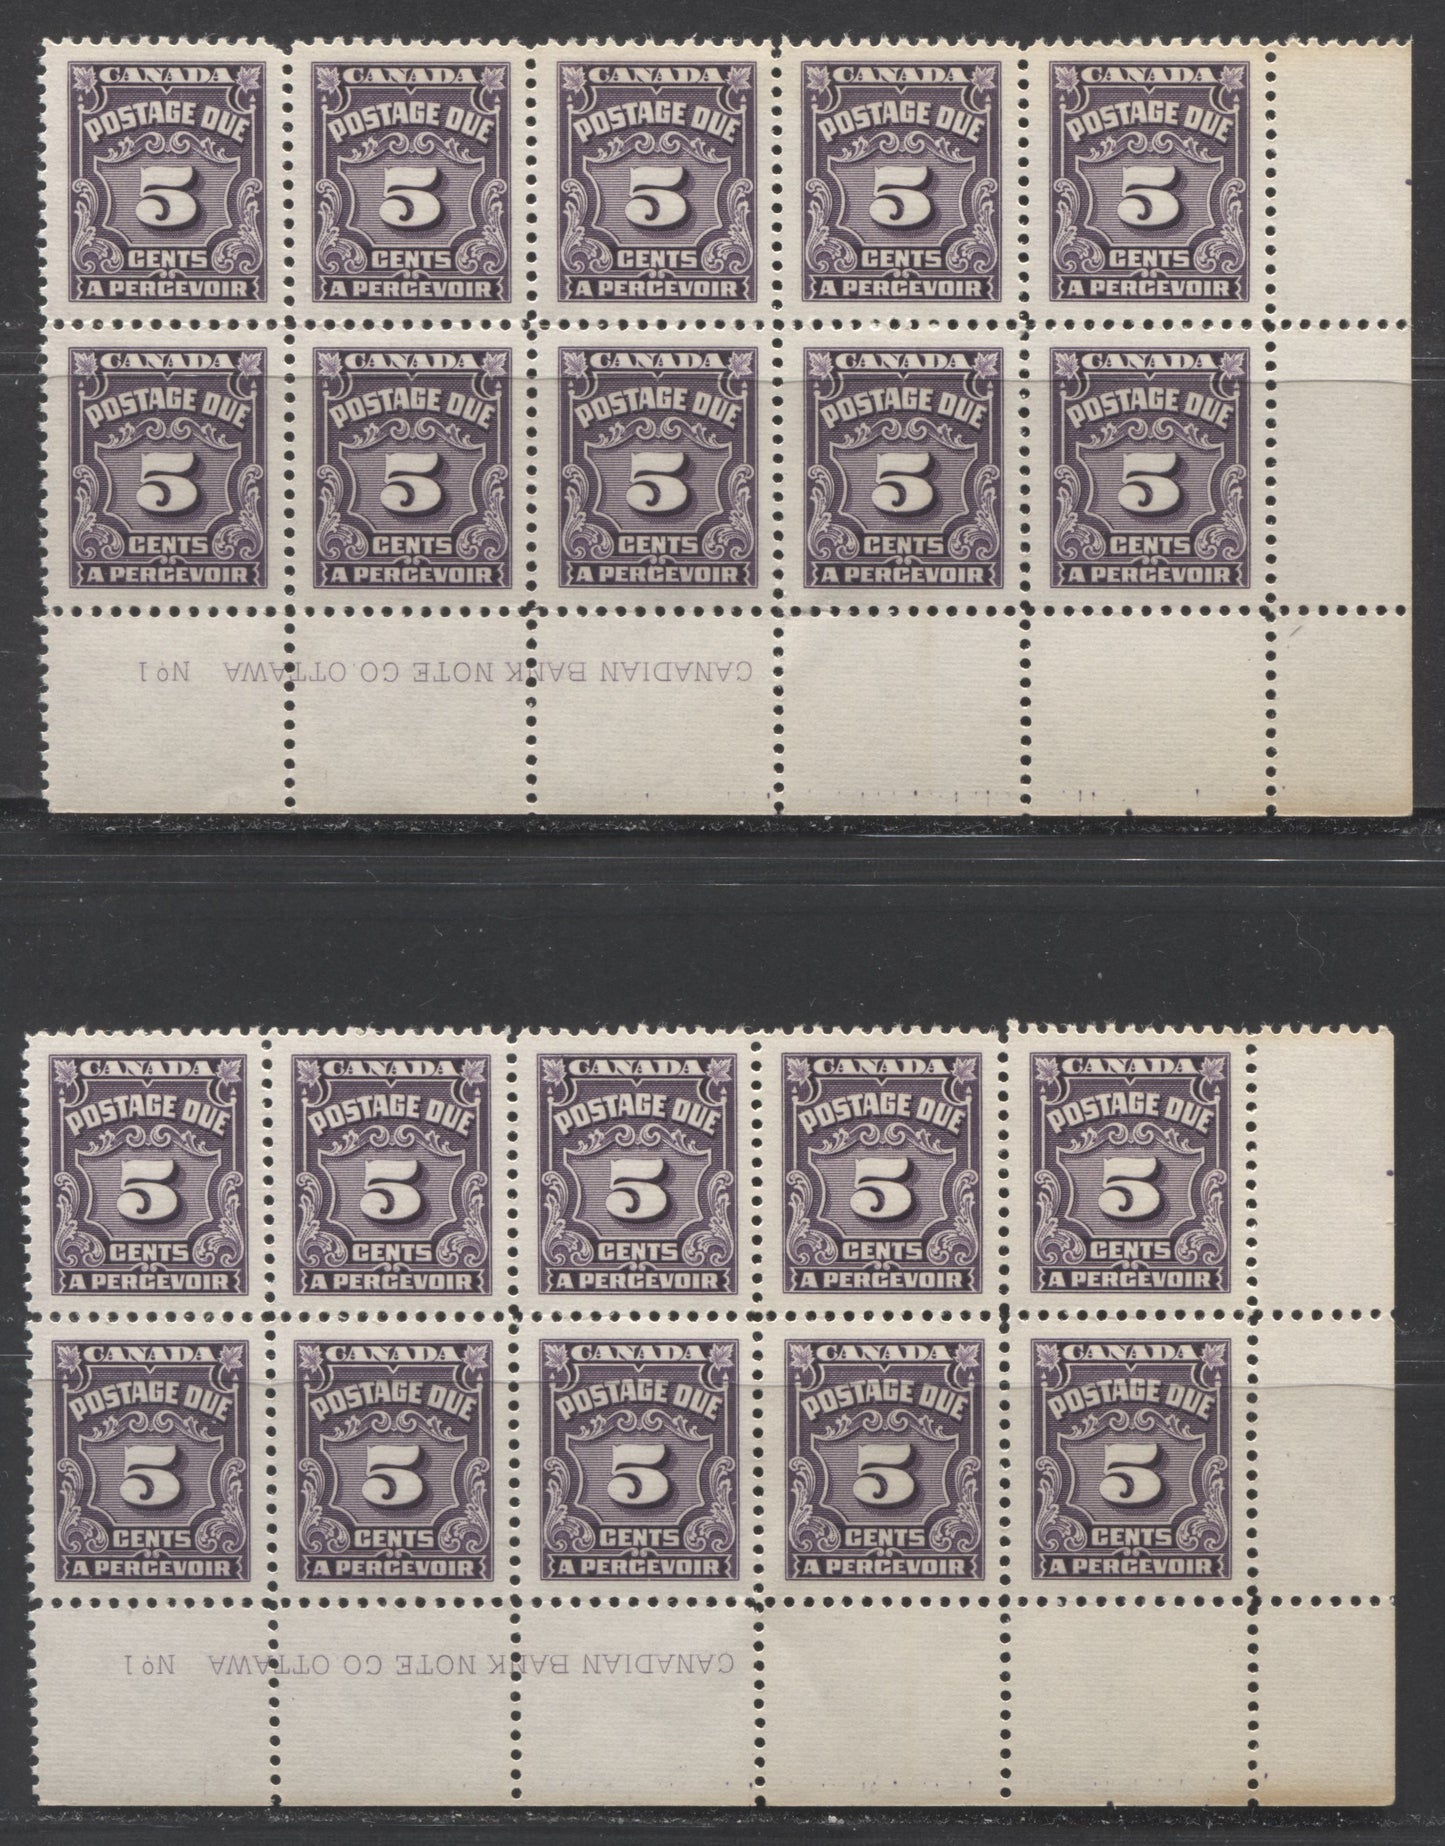 Lot 85 Canada #J18 5c Deep Rose Lilac & Deep Reddish Lilac, 1935-1965 Fourth Postage Due Issue, 2 VFNH LR Plate 1 Block Of 10 On Ribbed Paper With Yellowish Cream Gum